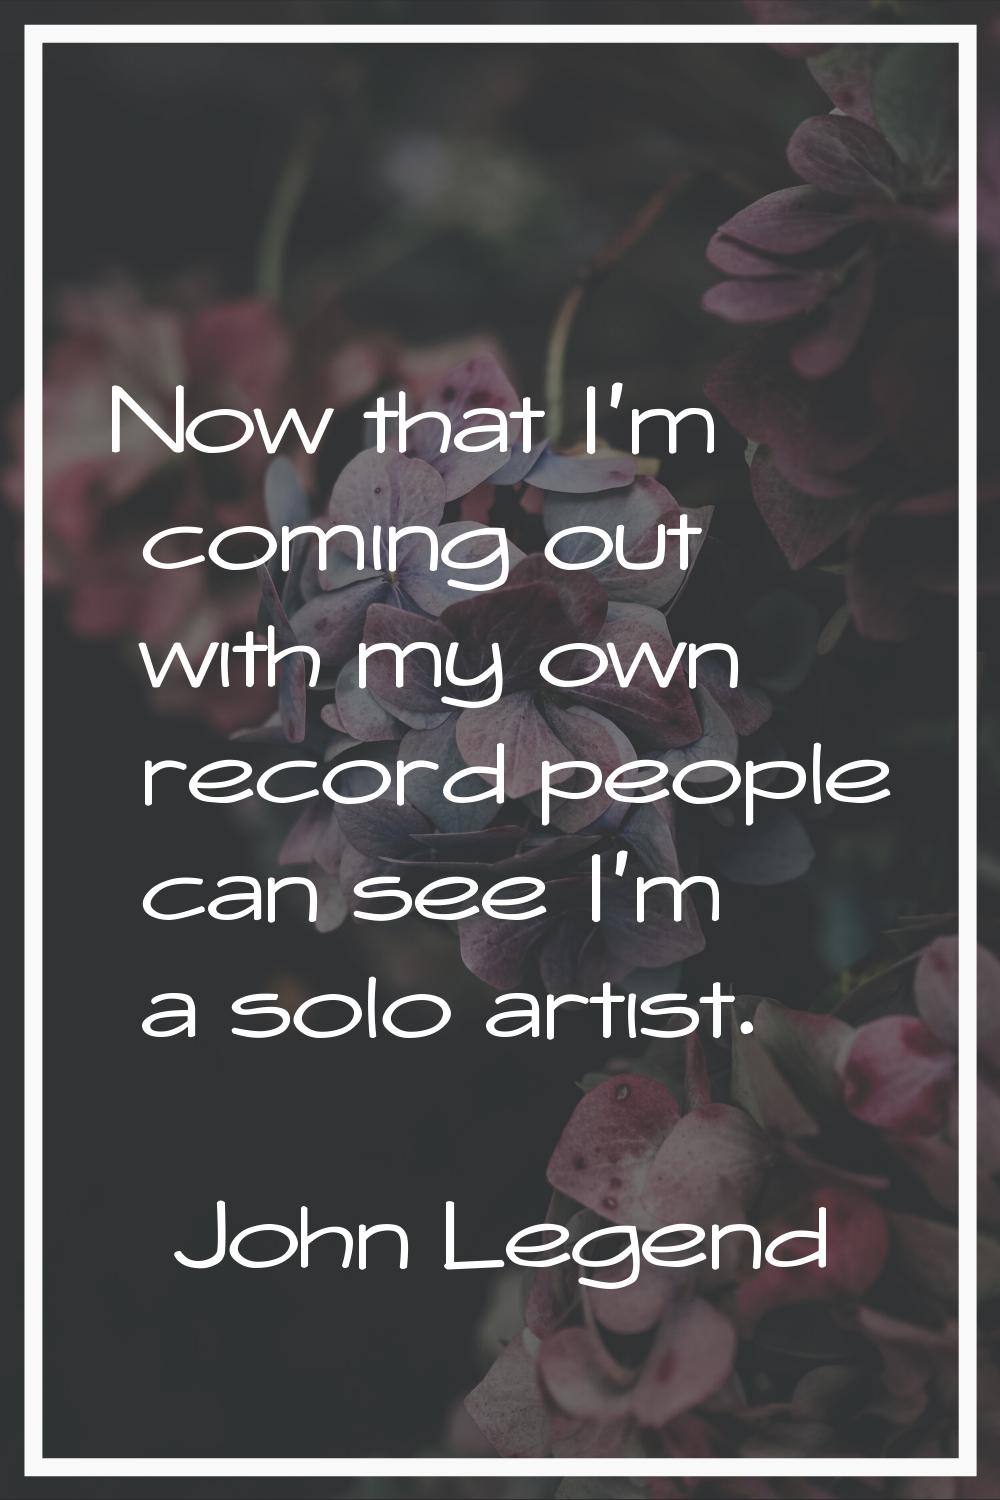 Now that I'm coming out with my own record people can see I'm a solo artist.